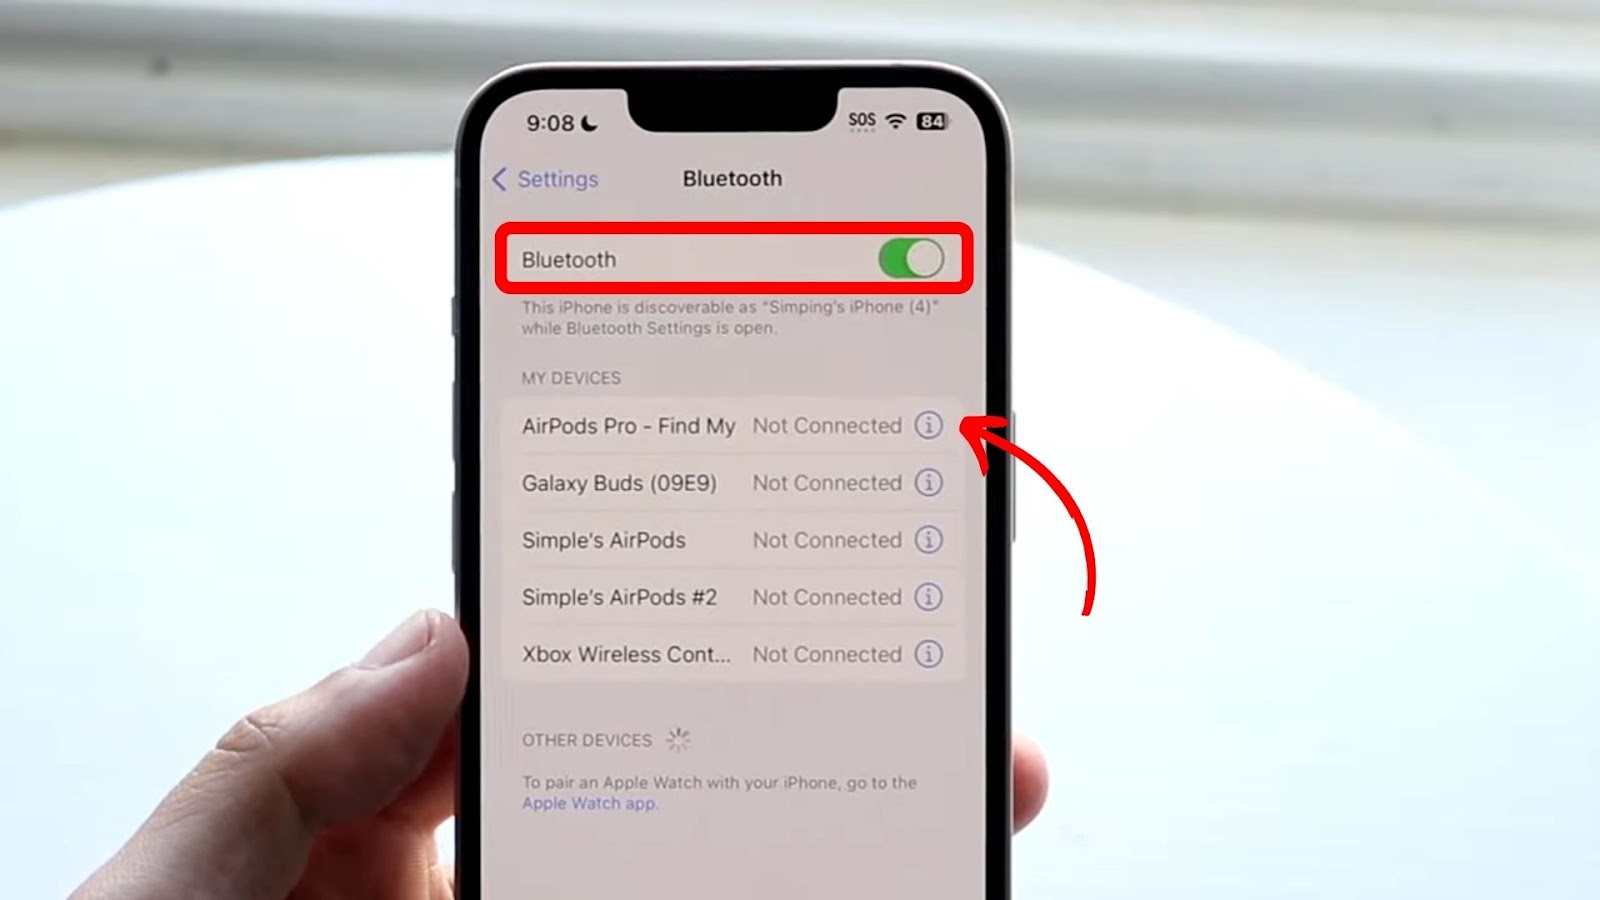 Disable Bluetooth on iPhone to Reconnect AirPods